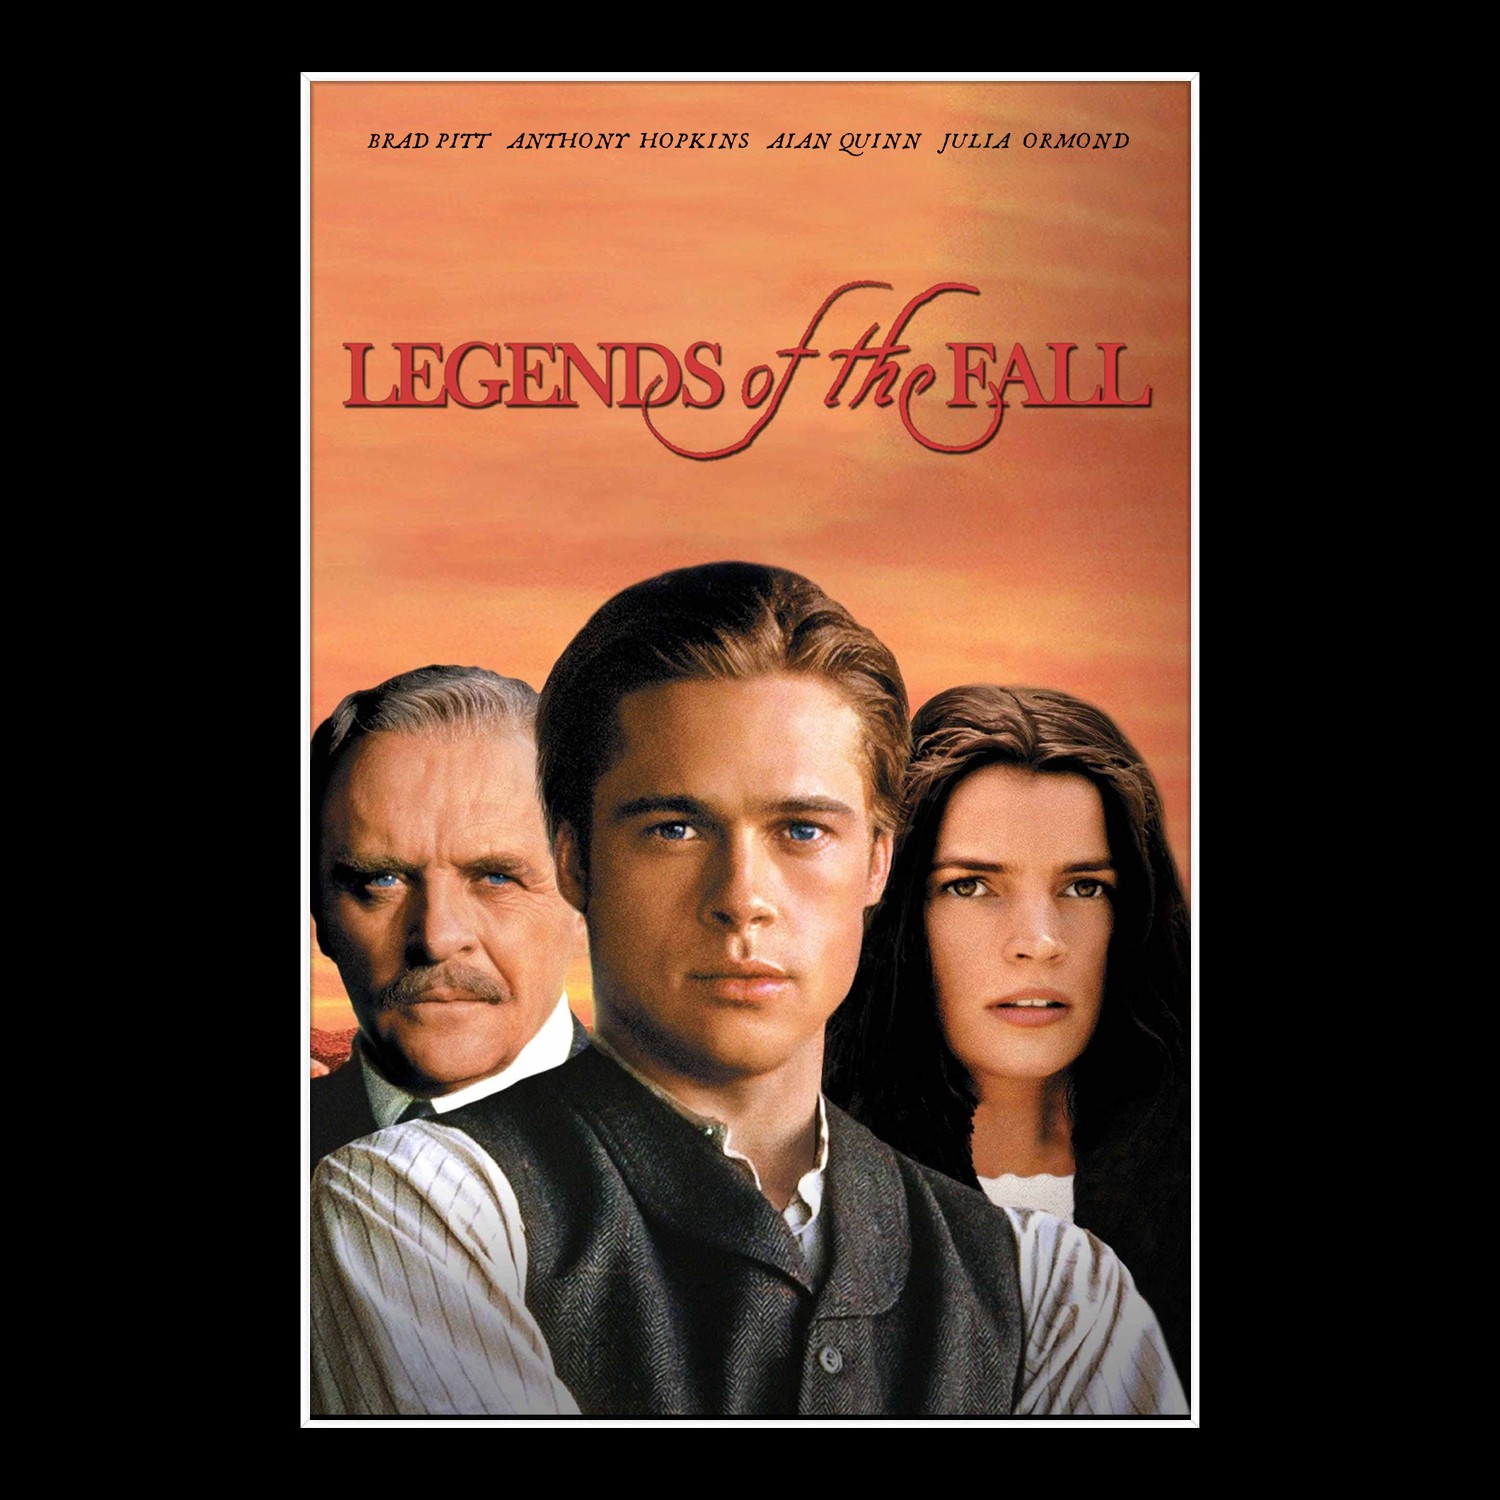 Legends of the Fall (DVD) 